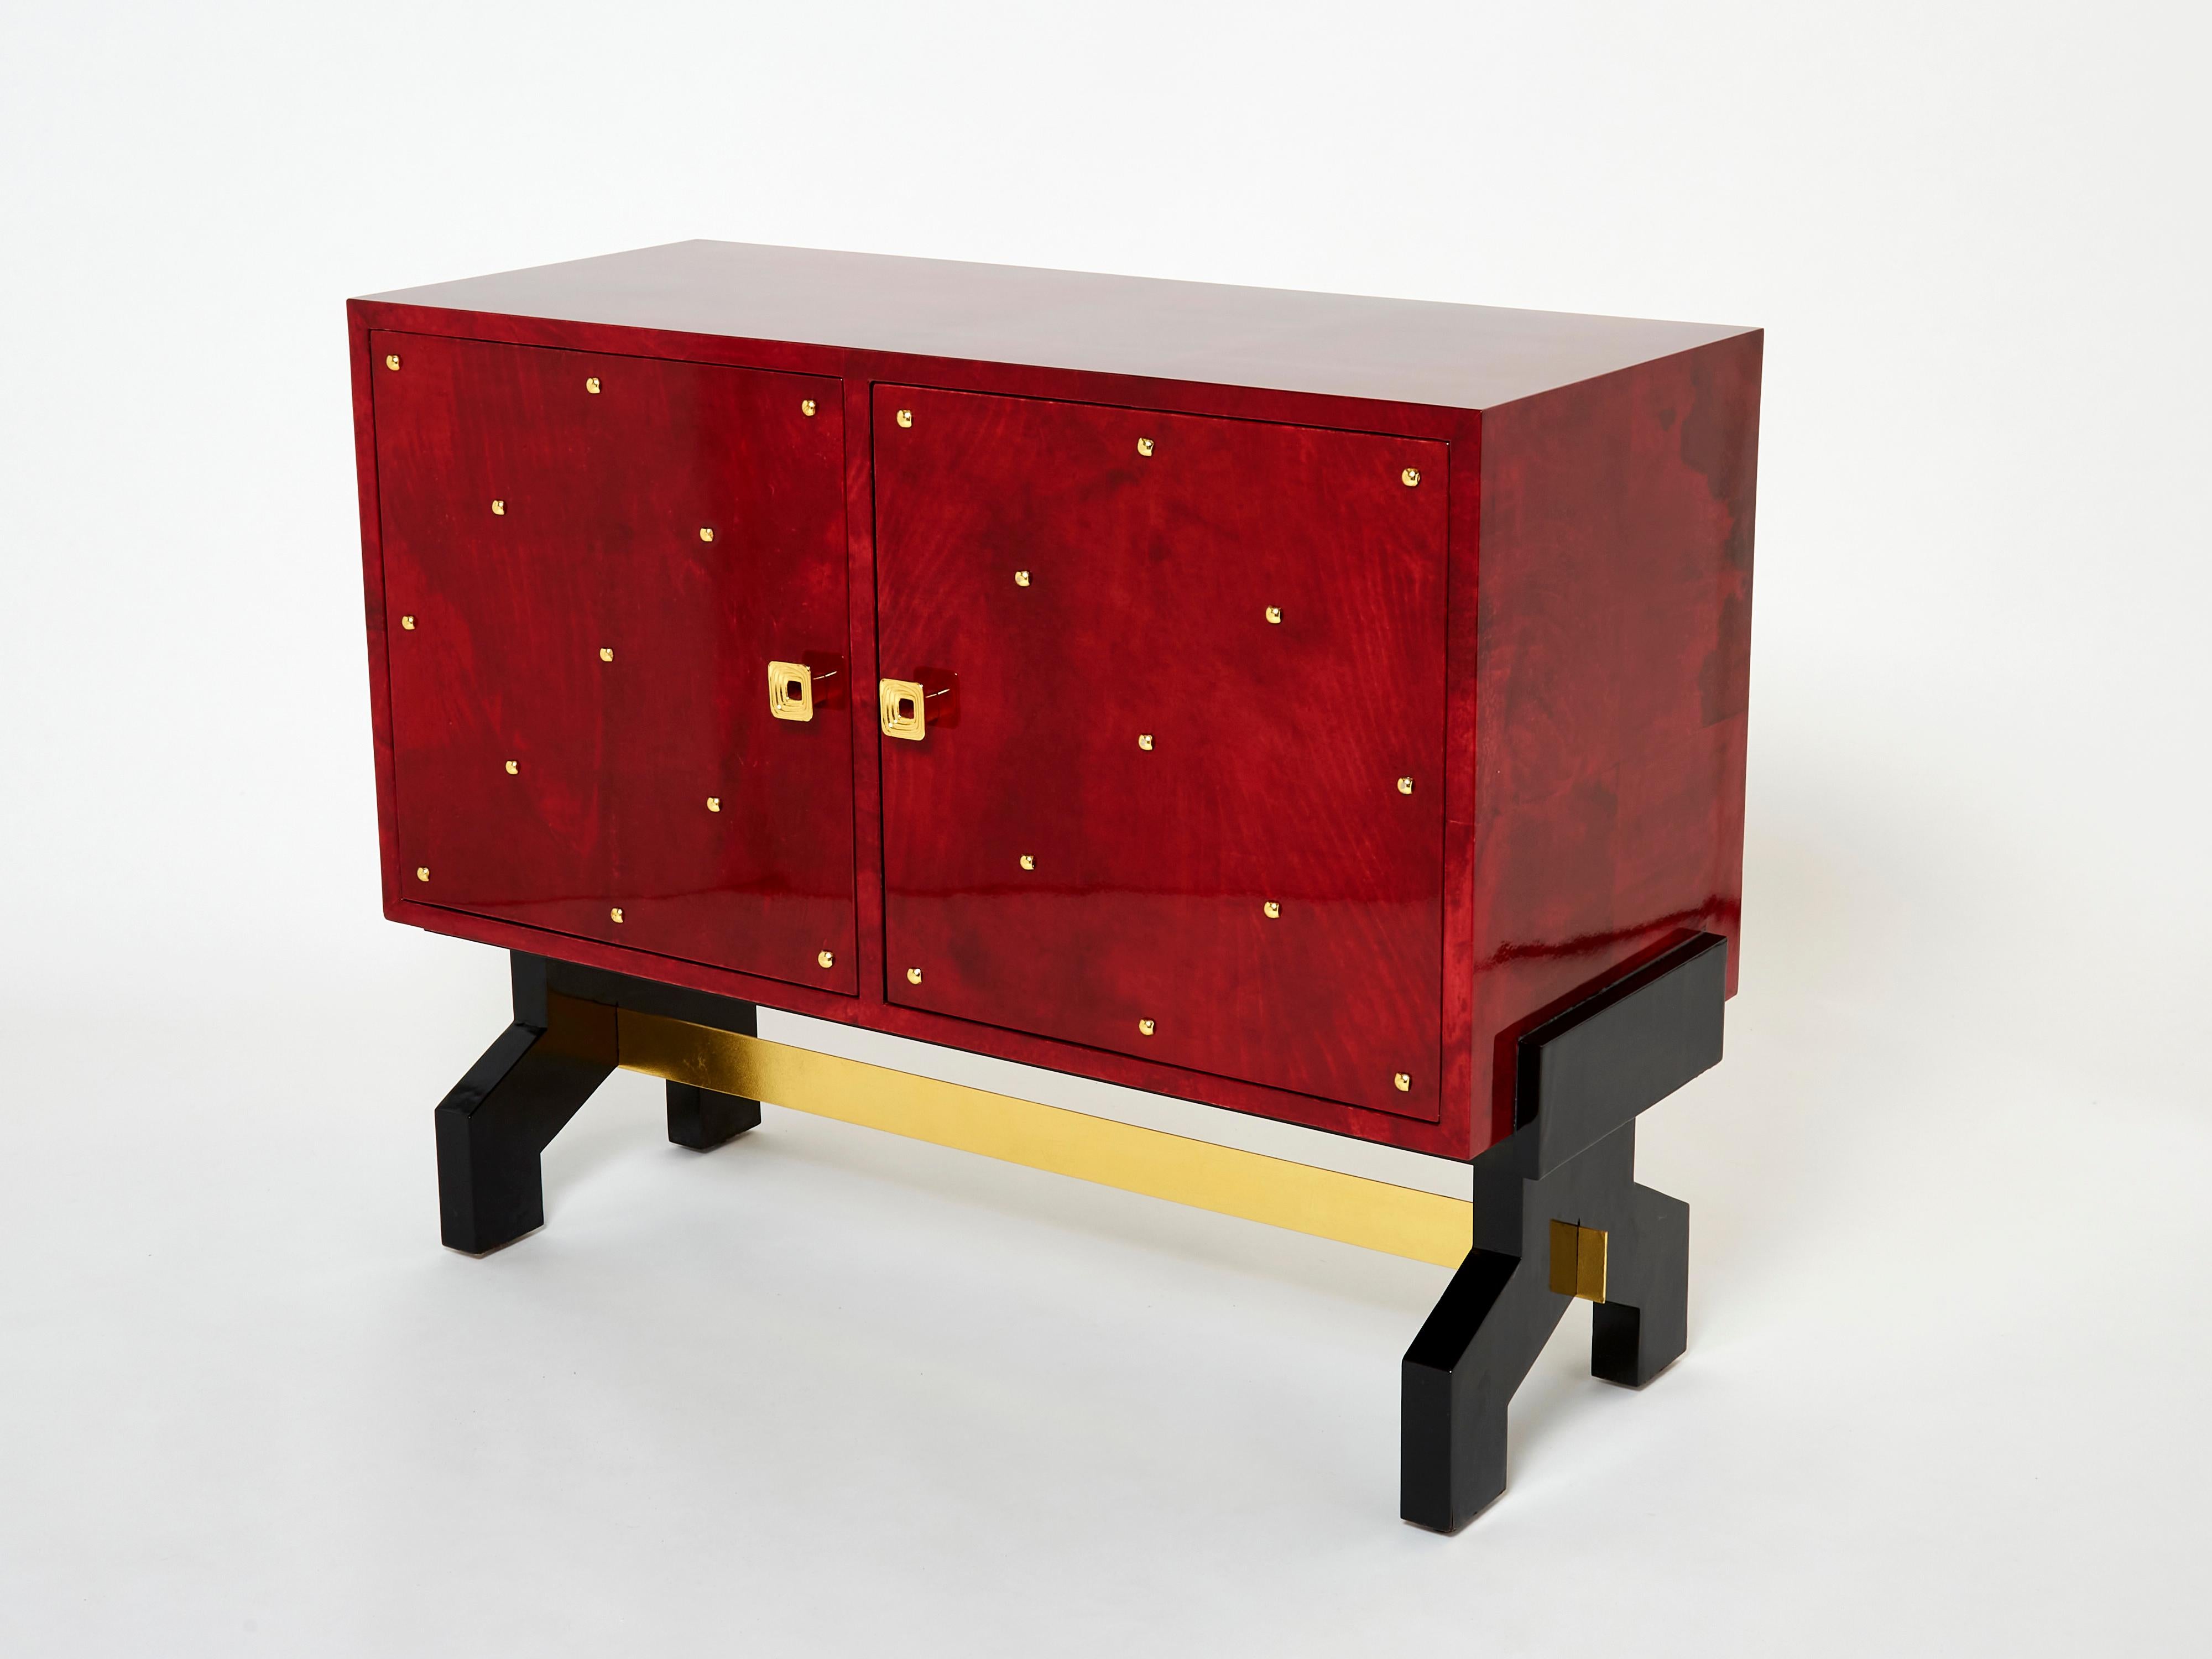 A unique and timeless vintage piece, this Aldo Tura midcentury cabinet bar feels imposing and glamorous. The varnished goatskin parchment, in rich shades of red, makes this cabinet typical of designer Aldo Tura. Its boxy style, featuring two doors